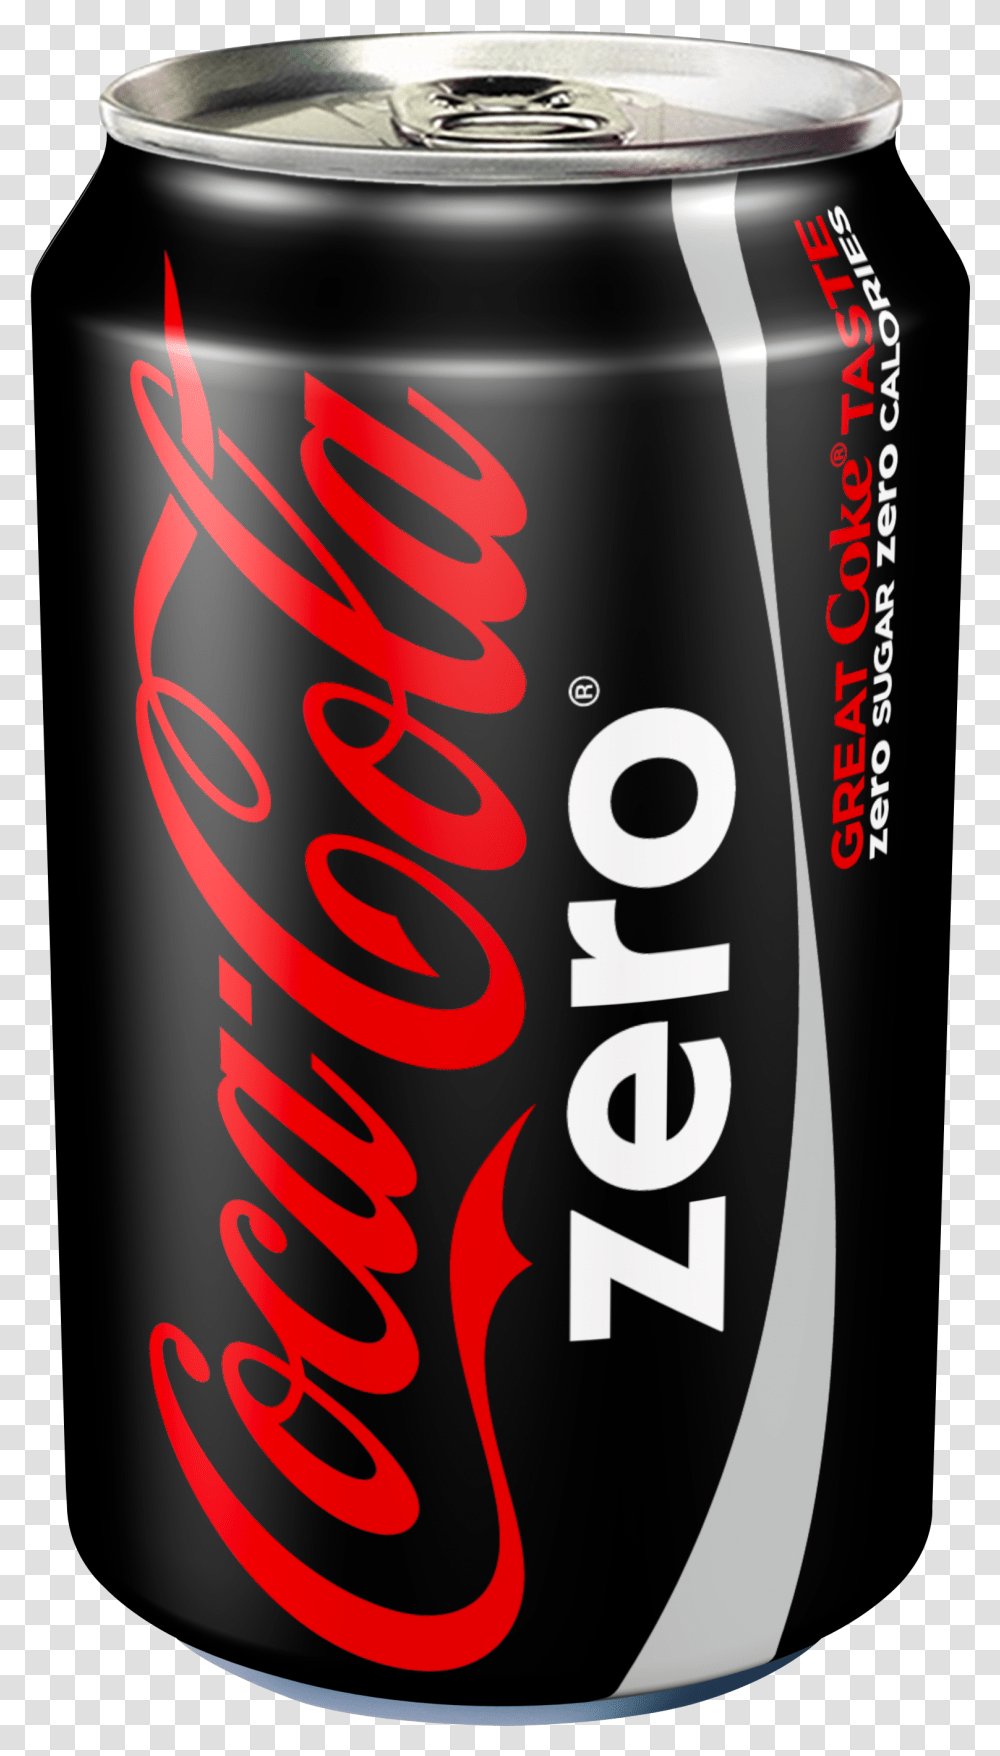 Coke & Clipart Free Download Ywd Coca Cola Zero 330 Ml, Beverage, Drink, Soda, Can Transparent Png